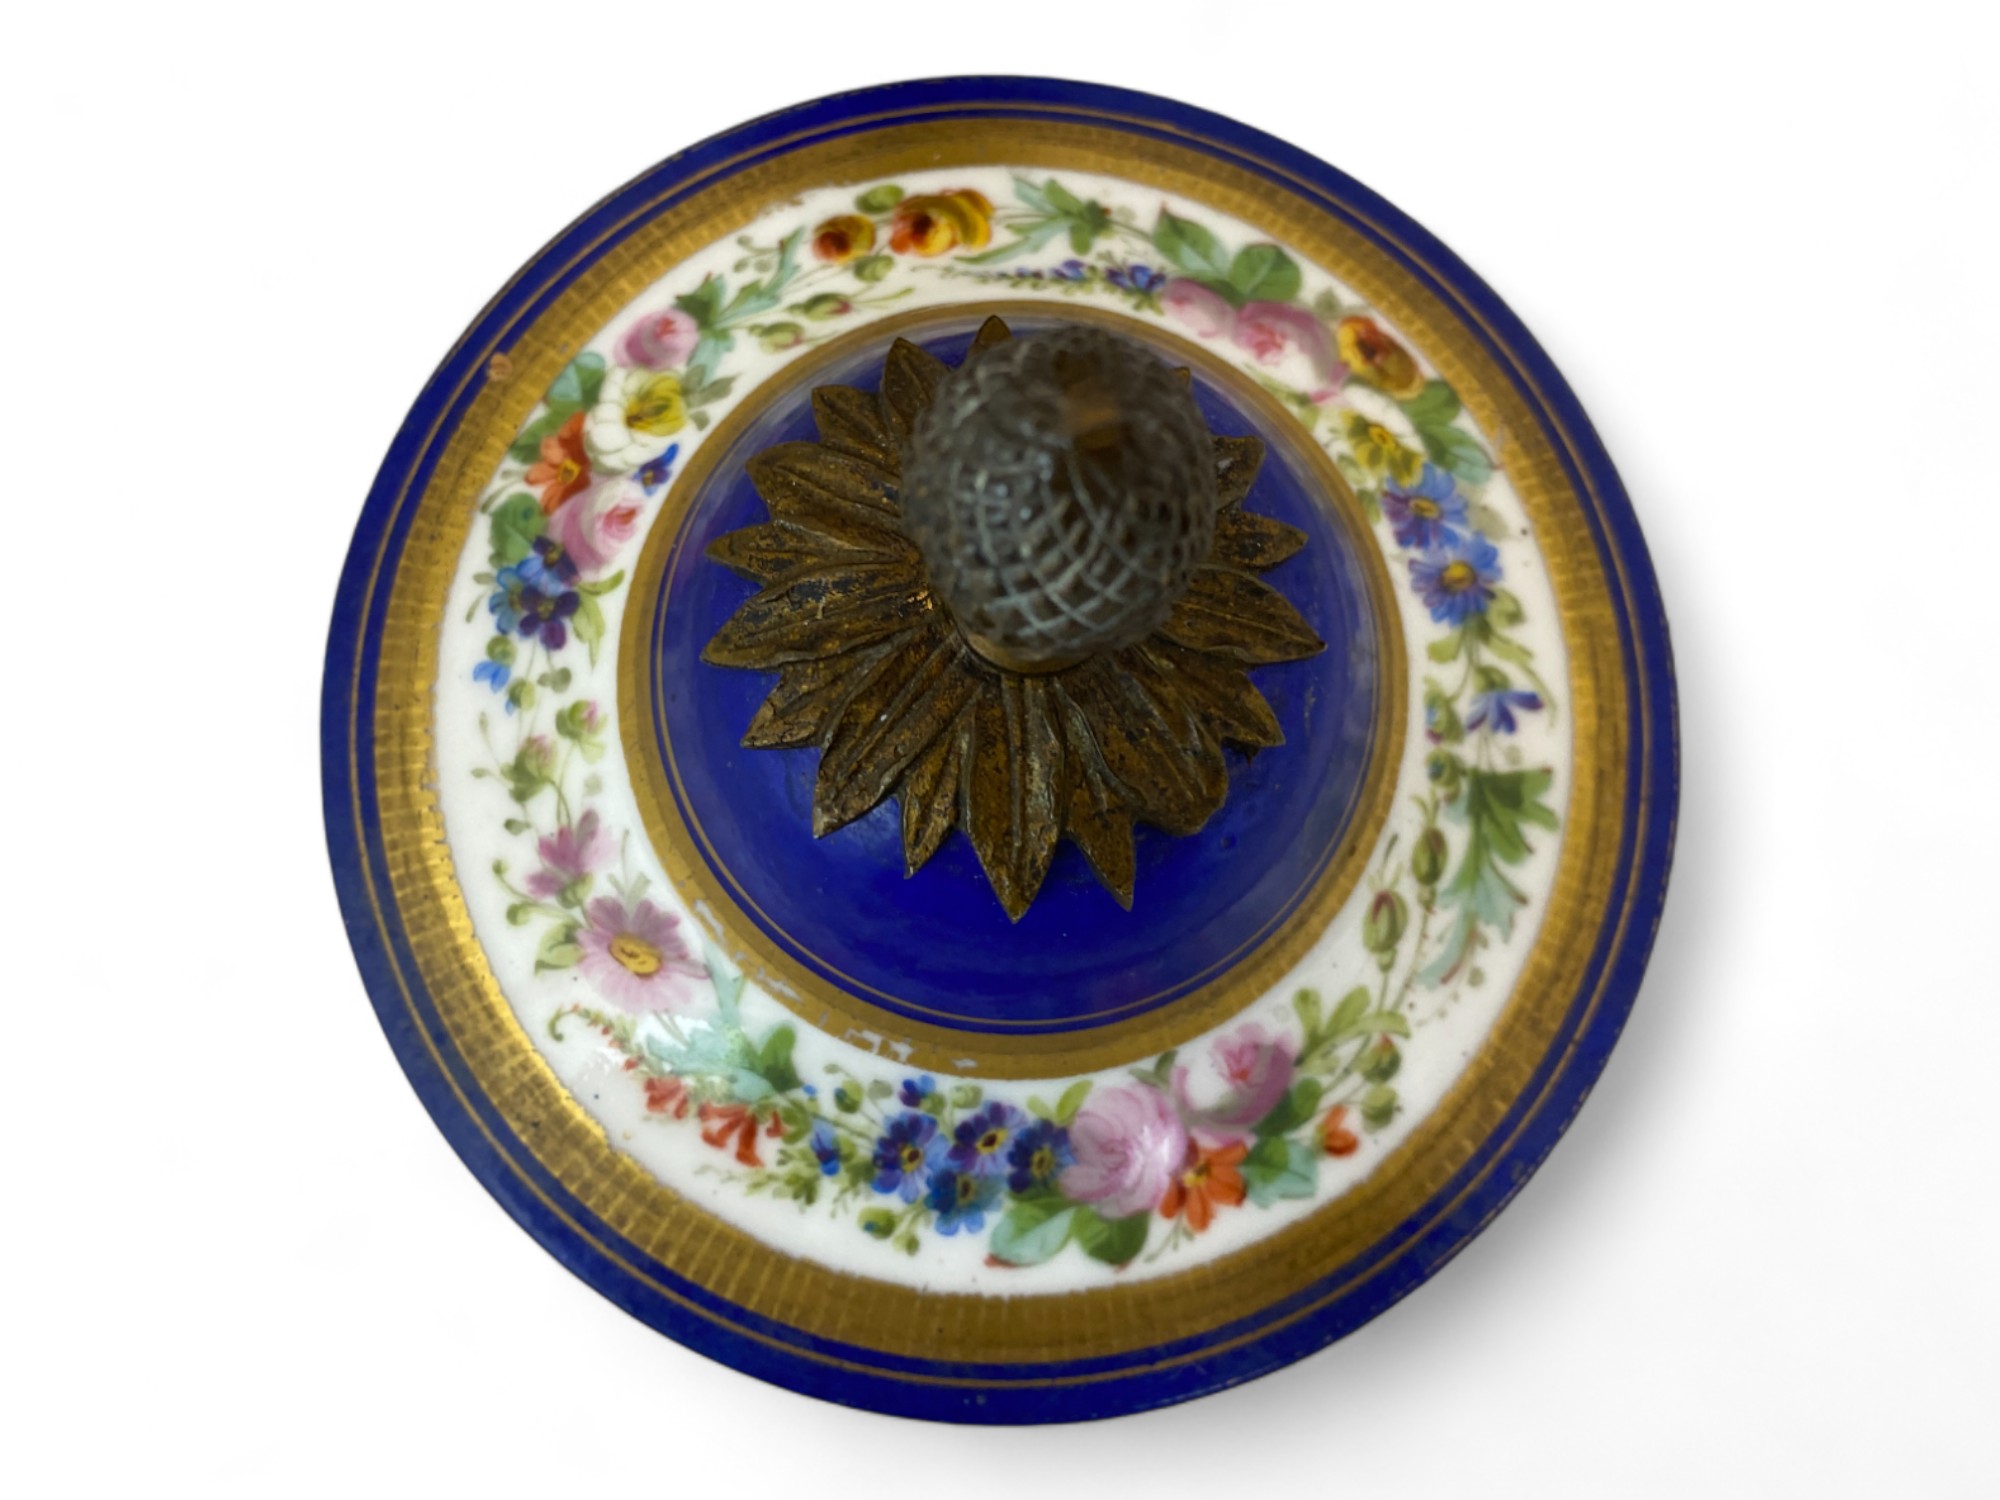 A 19th century Sèvres style porcelain and gilt bronze mounted beau bleu cup and cover - Image 6 of 10